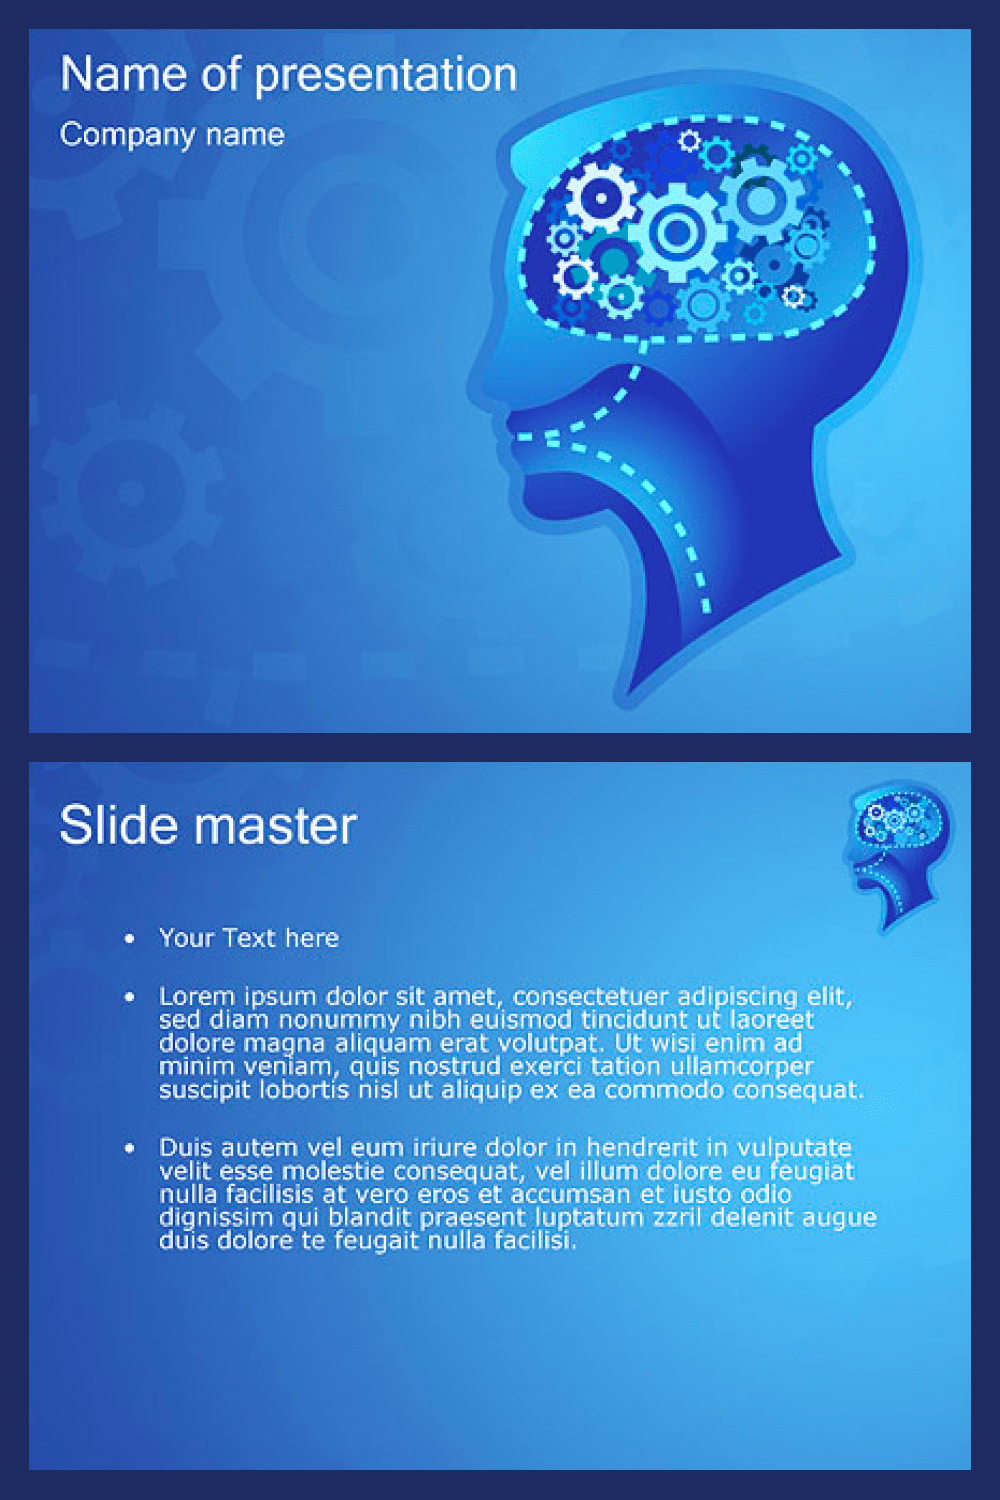 Mentality powerpoint template.